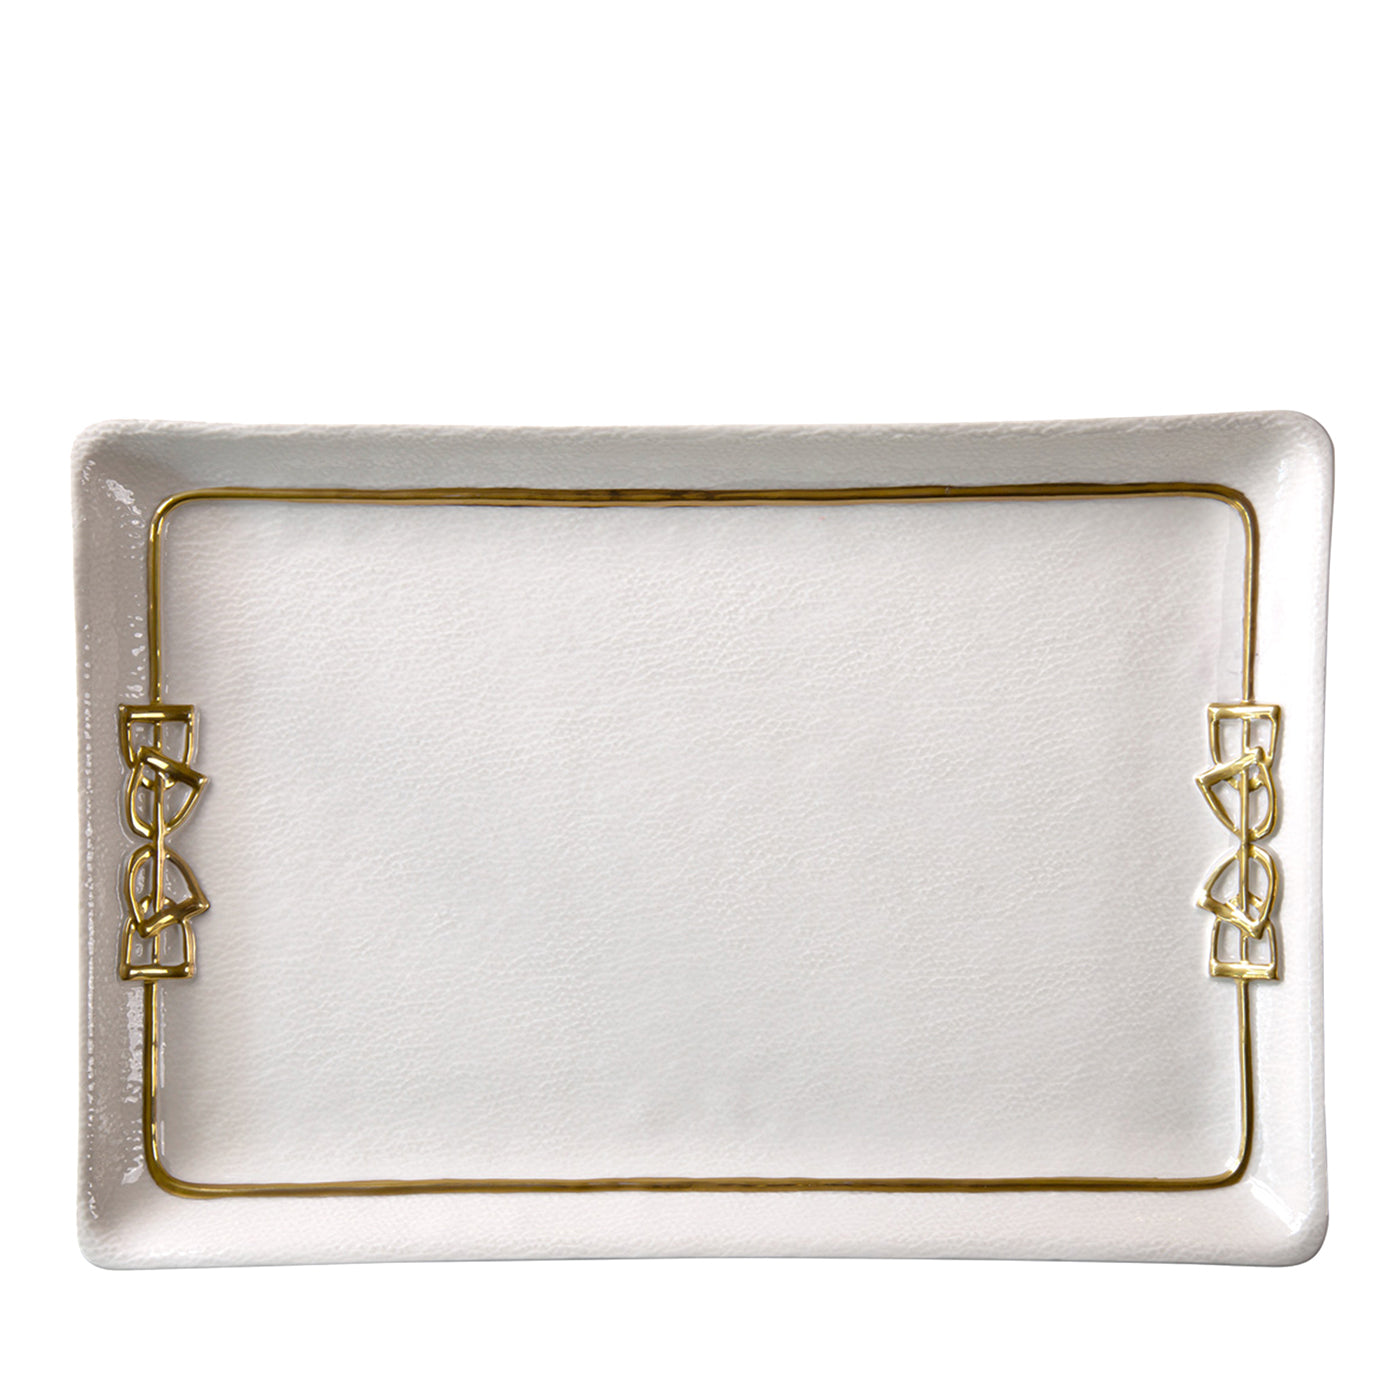 DRESSAGE TRAY - WHITE AND GOLD - Main view